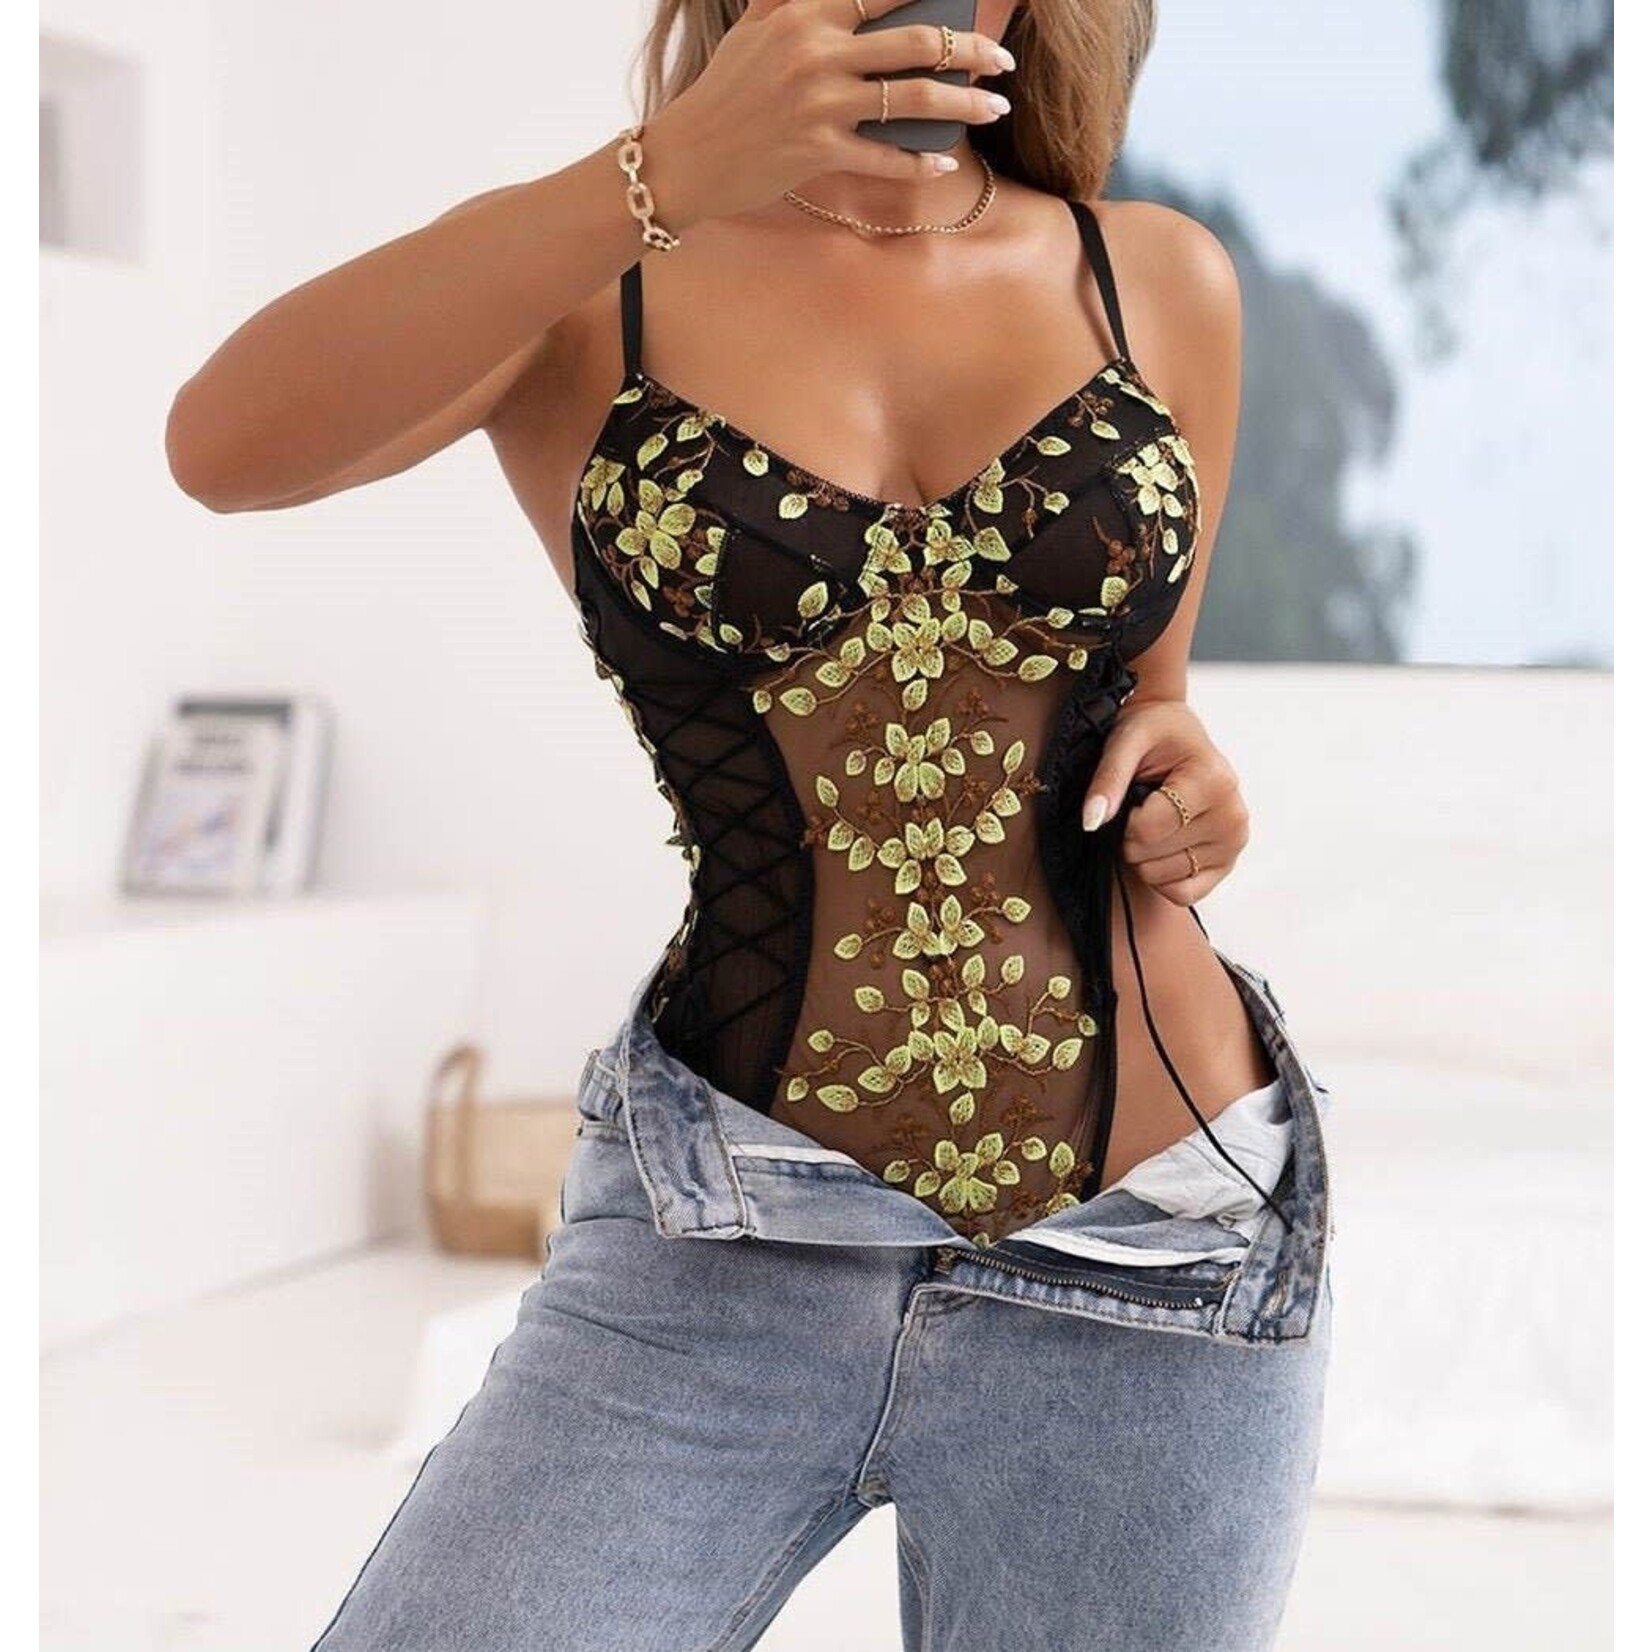 OH YEAH! -  FASHION EMBROIDERY BLACK MESH BODYSUIT WITH UNDERWIRE M